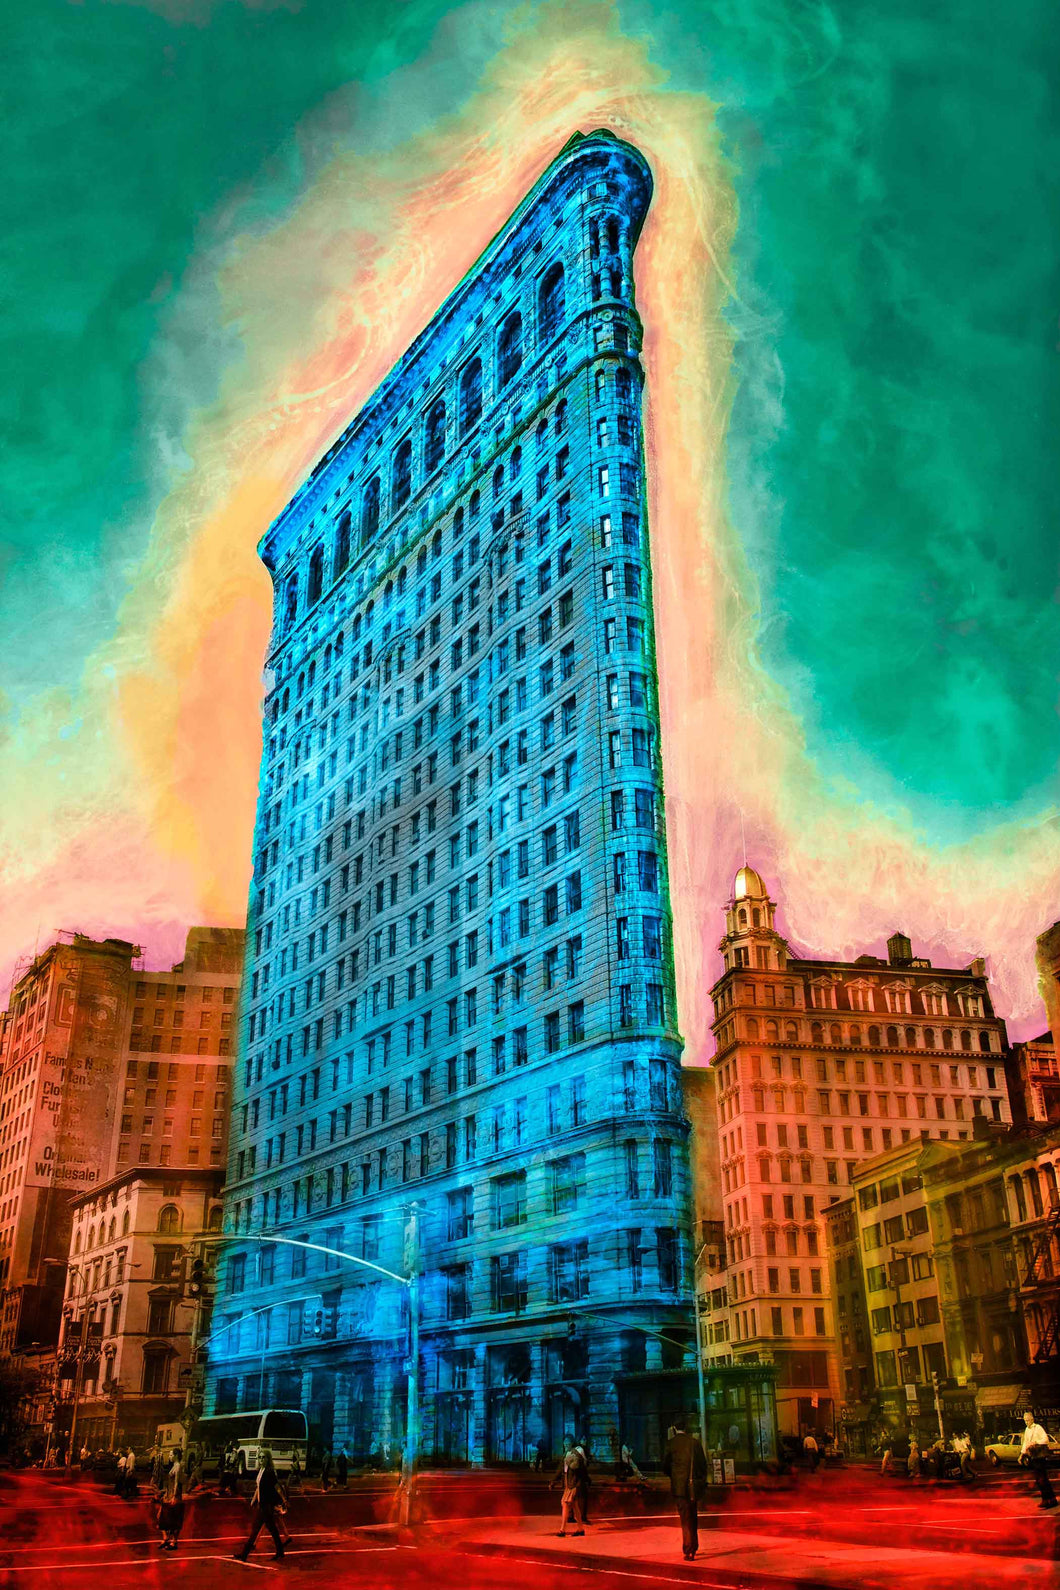 flatiron building pop art mixed media photo with paint splashes and intense colors